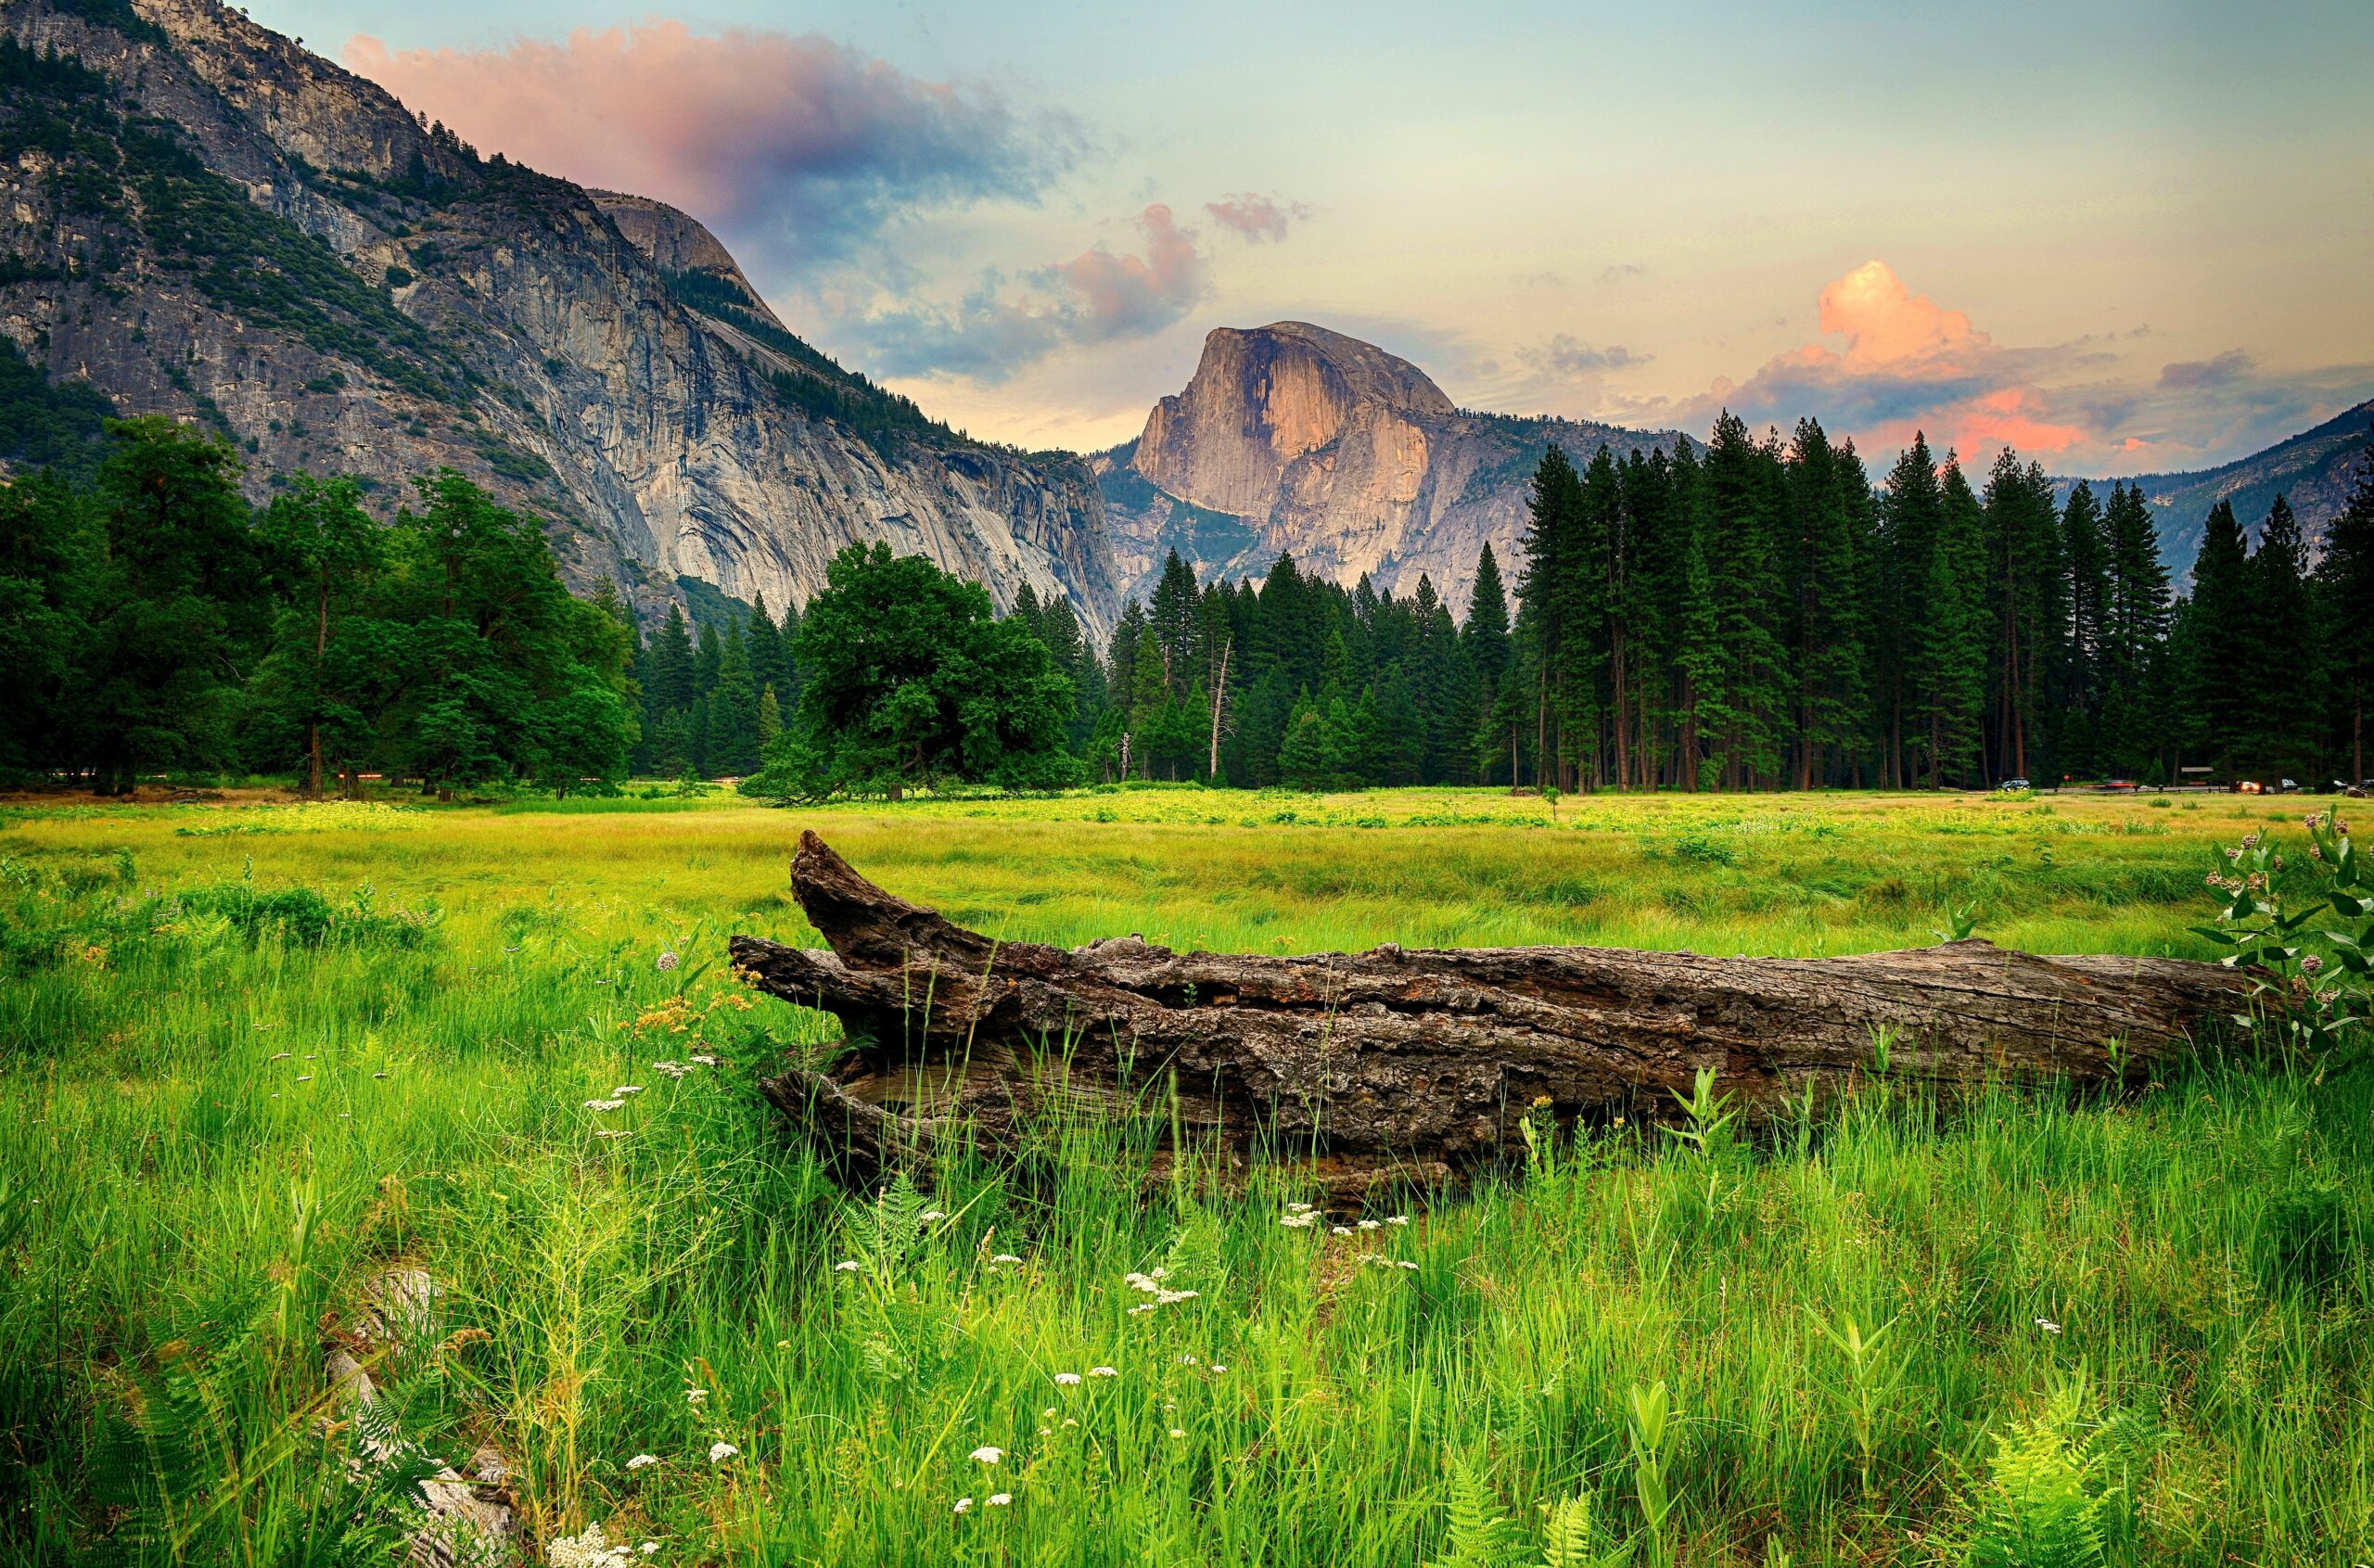 usa, Parks, Mountains, Forests, Scenery, Yosemite, Grass, Nature